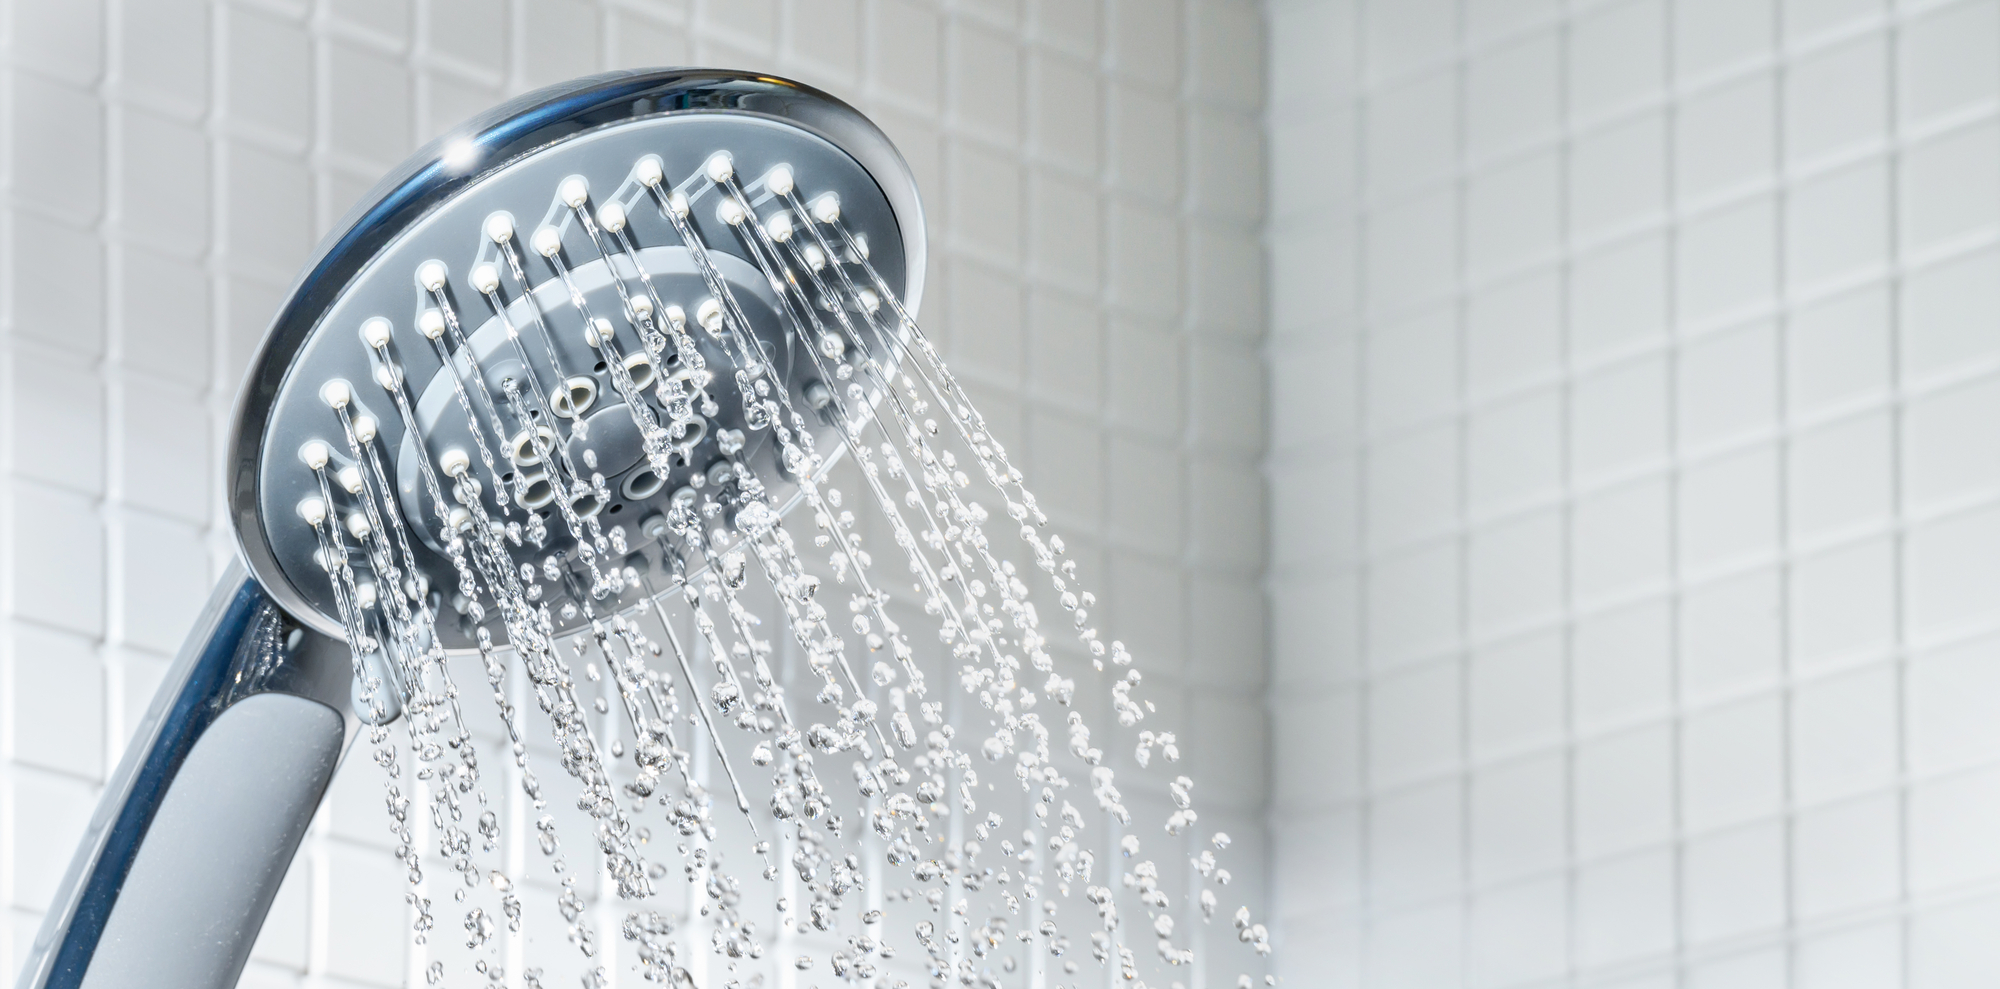 Modern blue Shower head with running water in white bathroom. Copy space